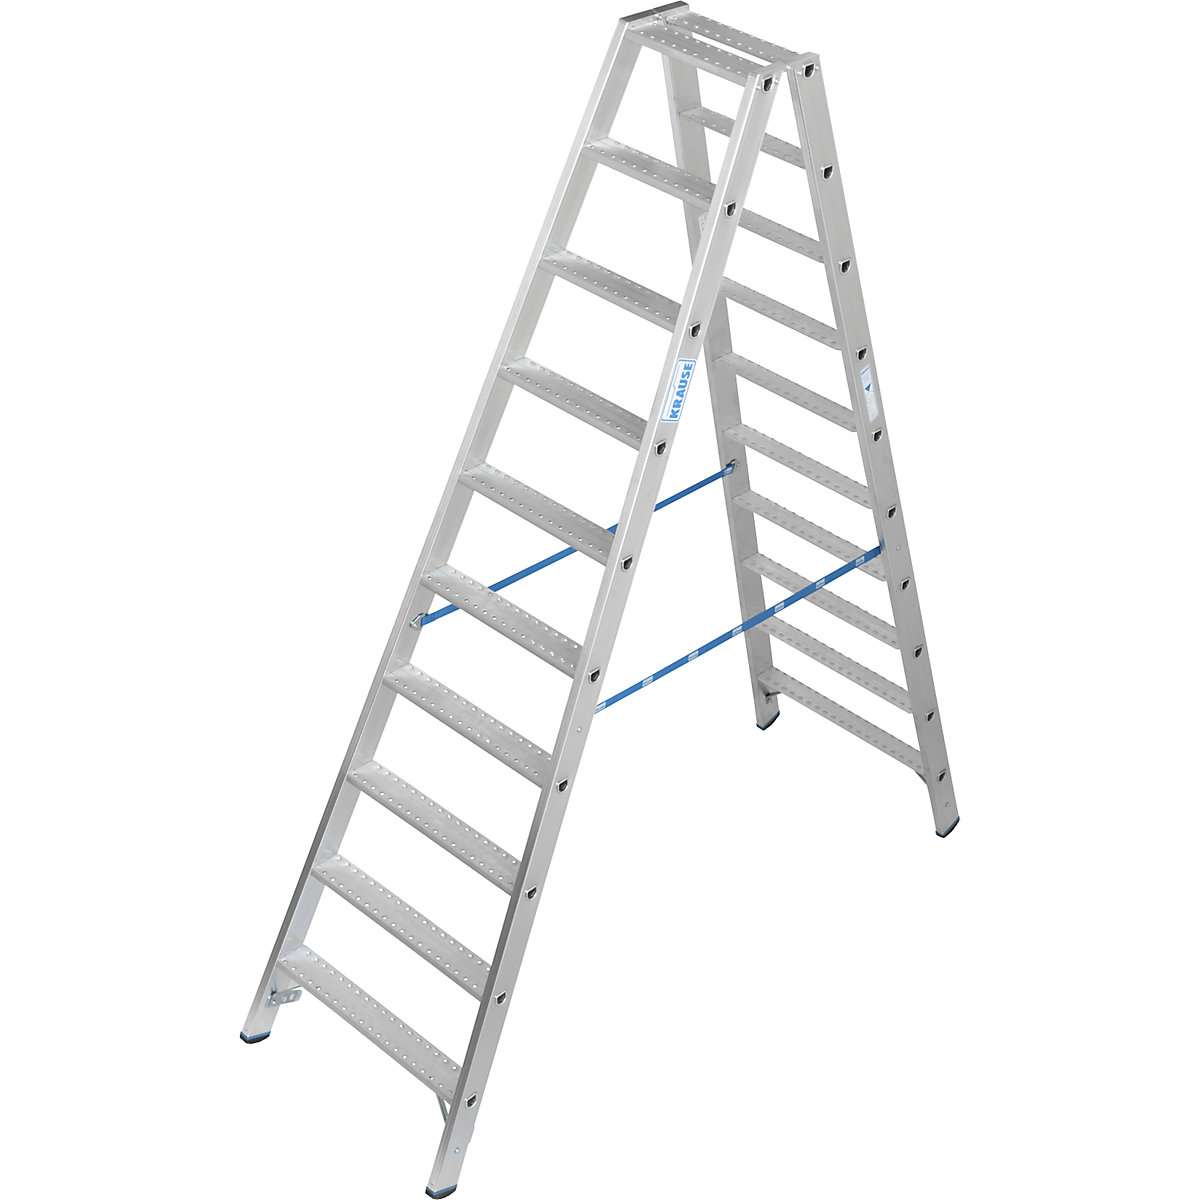 Aluminium stepladder, with R13 anti-slip properties – KRAUSE, double sided access, 2x10 steps-4